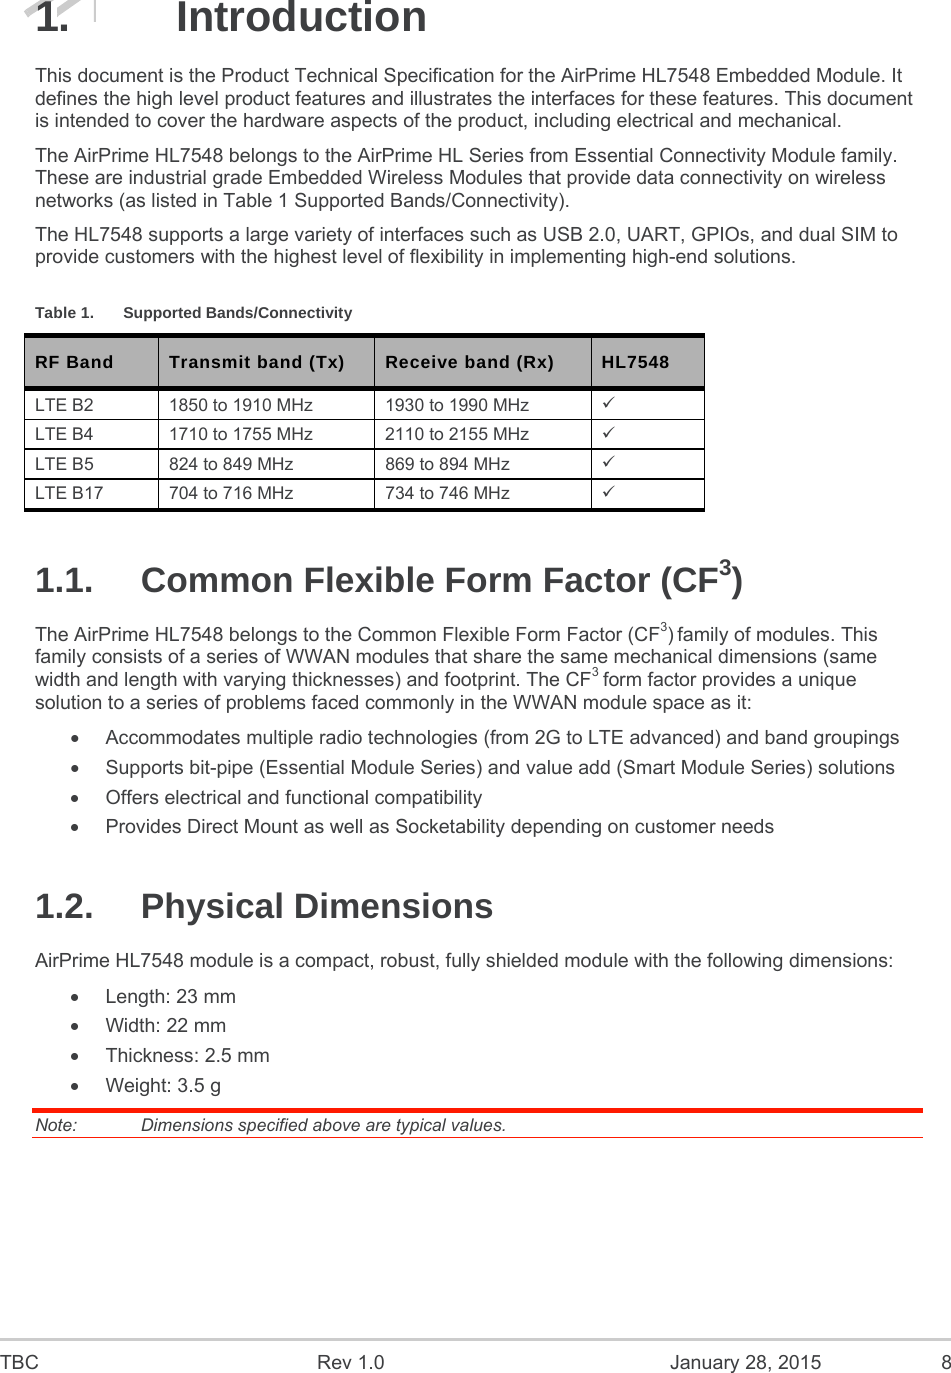  TBC  Rev 1.0  January 28, 2015  8 1. Introduction This document is the Product Technical Specification for the AirPrime HL7548 Embedded Module. It defines the high level product features and illustrates the interfaces for these features. This document is intended to cover the hardware aspects of the product, including electrical and mechanical. The AirPrime HL7548 belongs to the AirPrime HL Series from Essential Connectivity Module family. These are industrial grade Embedded Wireless Modules that provide data connectivity on wireless networks (as listed in Table 1 Supported Bands/Connectivity).  The HL7548 supports a large variety of interfaces such as USB 2.0, UART, GPIOs, and dual SIM to provide customers with the highest level of flexibility in implementing high-end solutions. Table 1.  Supported Bands/Connectivity RF Band  Transmit band (Tx)  Receive band (Rx)  HL7548 LTE B2  1850 to 1910 MHz  1930 to 1990 MHz   LTE B4  1710 to 1755 MHz  2110 to 2155 MHz   LTE B5  824 to 849 MHz  869 to 894 MHz   LTE B17  704 to 716 MHz  734 to 746 MHz   1.1.  Common Flexible Form Factor (CF3)    The AirPrime HL7548 belongs to the Common Flexible Form Factor (CF3) family of modules. This family consists of a series of WWAN modules that share the same mechanical dimensions (same width and length with varying thicknesses) and footprint. The CF3 form factor provides a unique solution to a series of problems faced commonly in the WWAN module space as it:   Accommodates multiple radio technologies (from 2G to LTE advanced) and band groupings   Supports bit-pipe (Essential Module Series) and value add (Smart Module Series) solutions   Offers electrical and functional compatibility    Provides Direct Mount as well as Socketability depending on customer needs 1.2. Physical Dimensions AirPrime HL7548 module is a compact, robust, fully shielded module with the following dimensions:   Length: 23 mm   Width: 22 mm  Thickness: 2.5 mm   Weight: 3.5 g Note:   Dimensions specified above are typical values. 